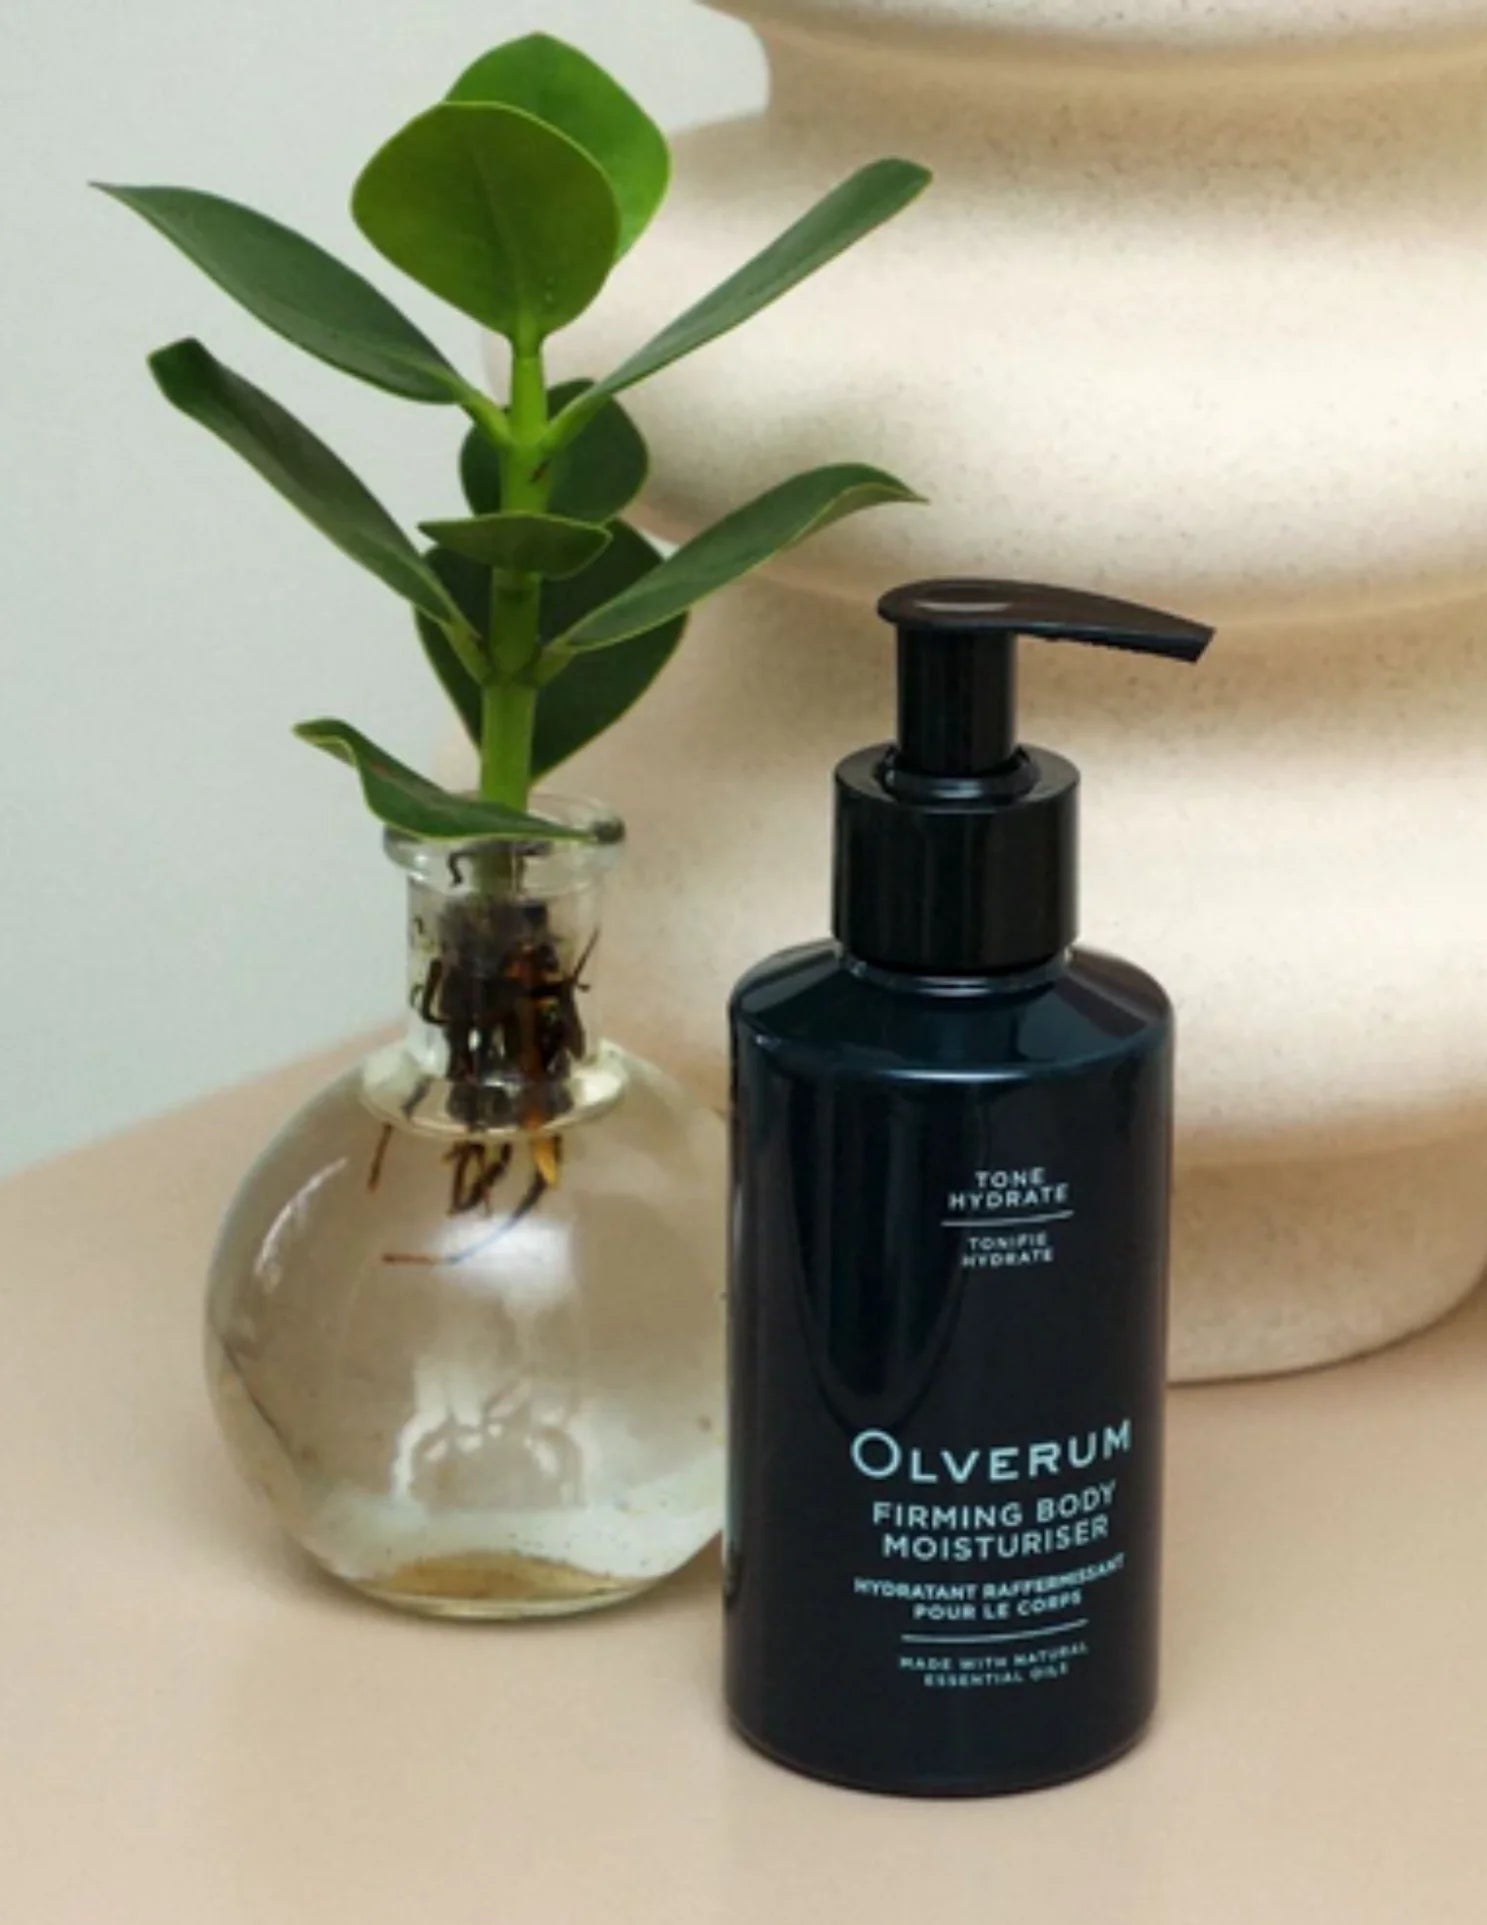 A product shot of Olverum&